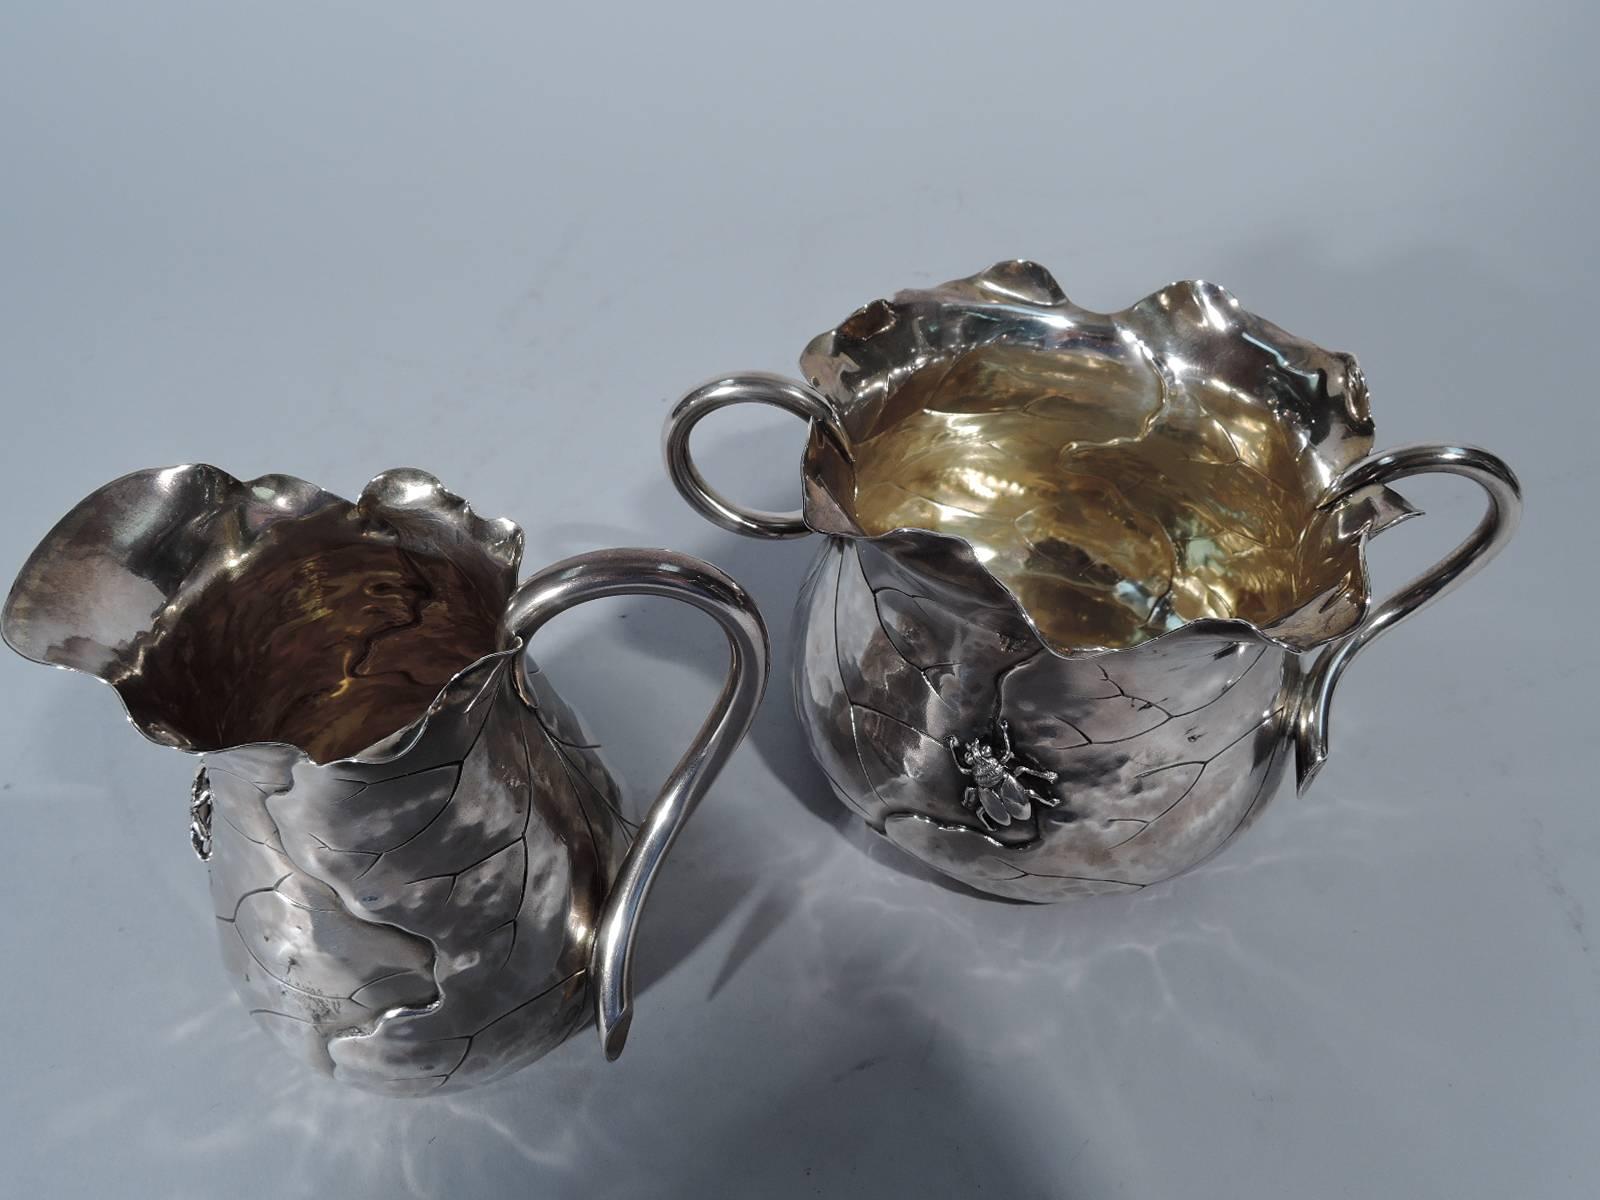 Japonesque applied sterling silver creamer and sugar. Made by Shiebler in New York, circa 1890. Both: wraparound leaf with engraved veins and wavy ruffled rim that evokes the wispy fragility and irregularities of a real leaf. Applied bugs and